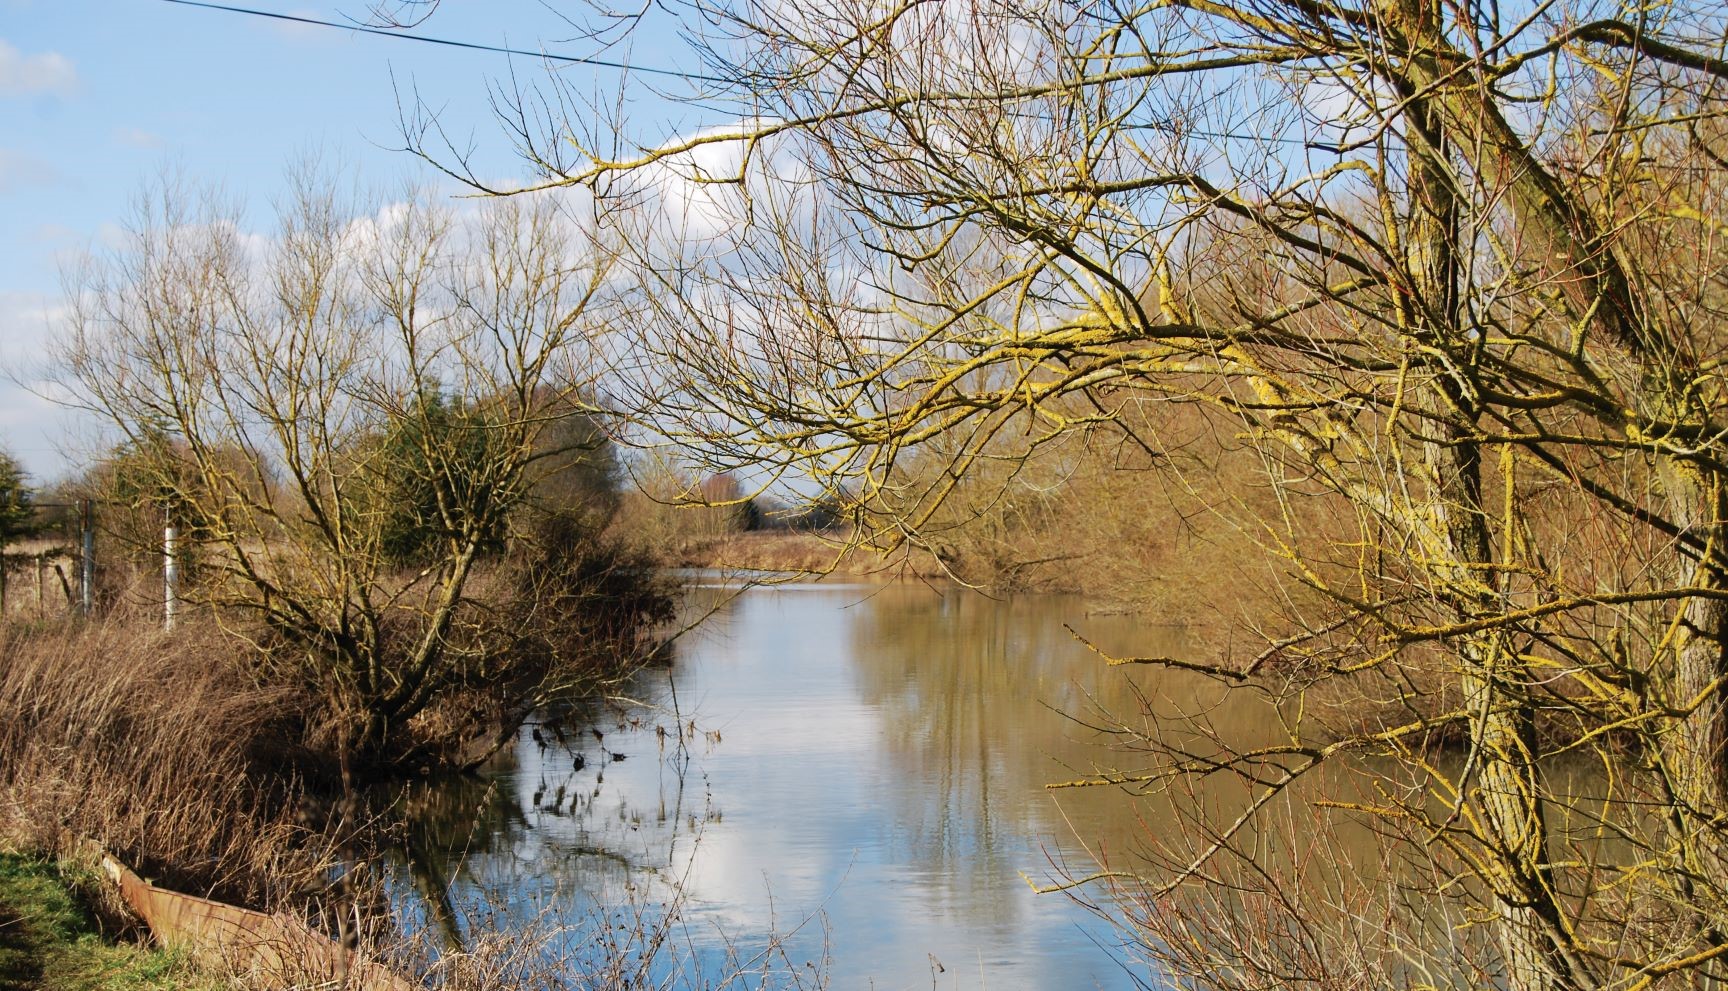 View of the River Avon from our riverside trail walk